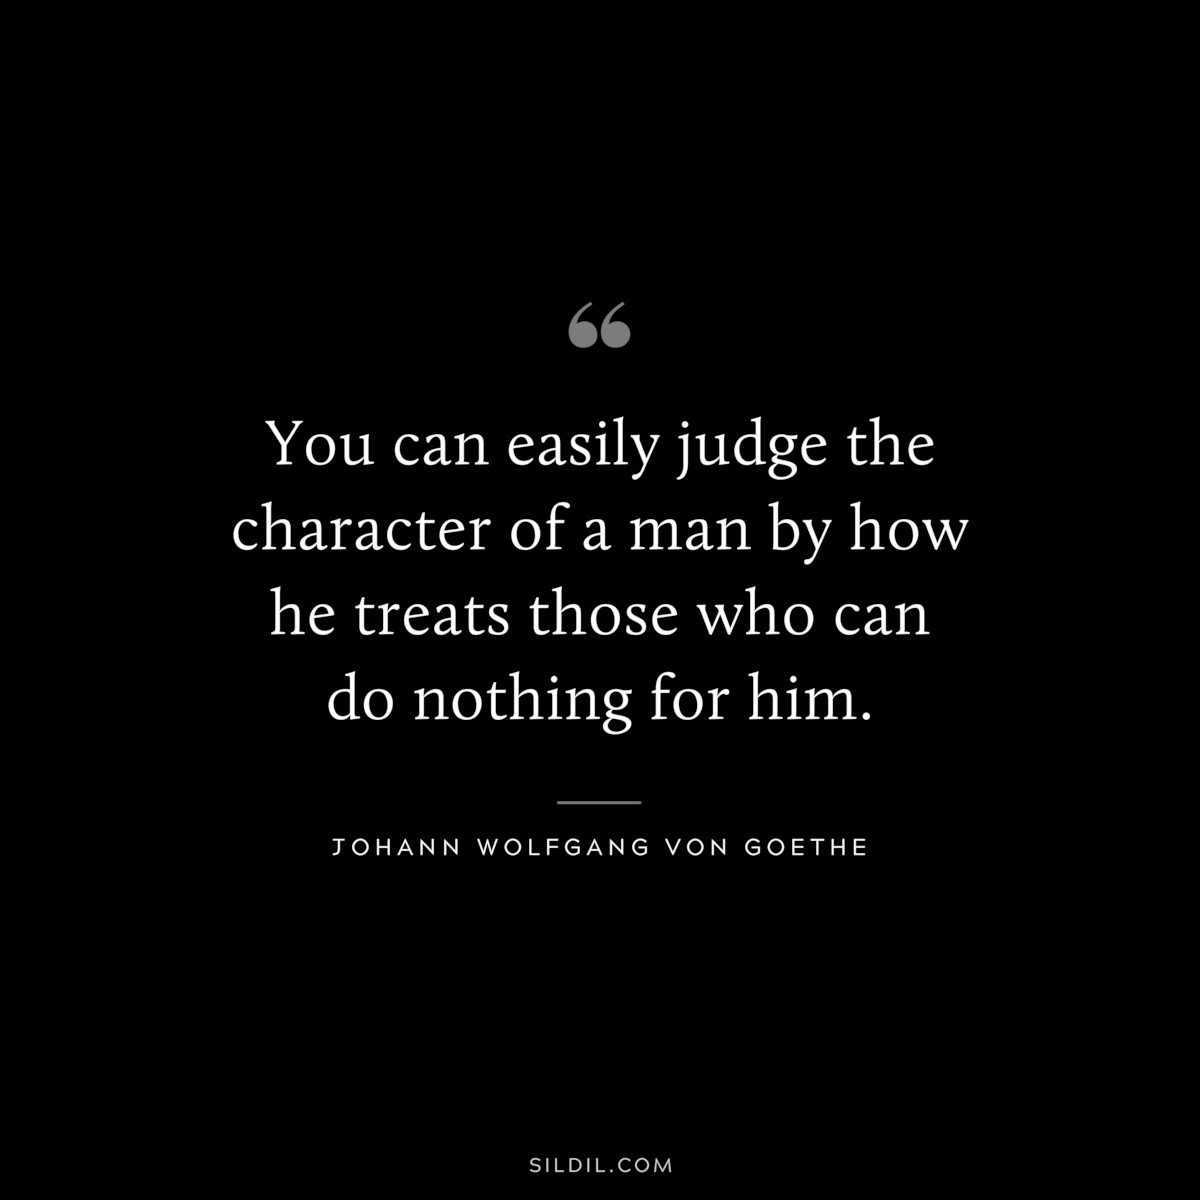 You can easily judge the character of a man by how he treats those who can do nothing for him.― Johann Wolfgang von Goethe